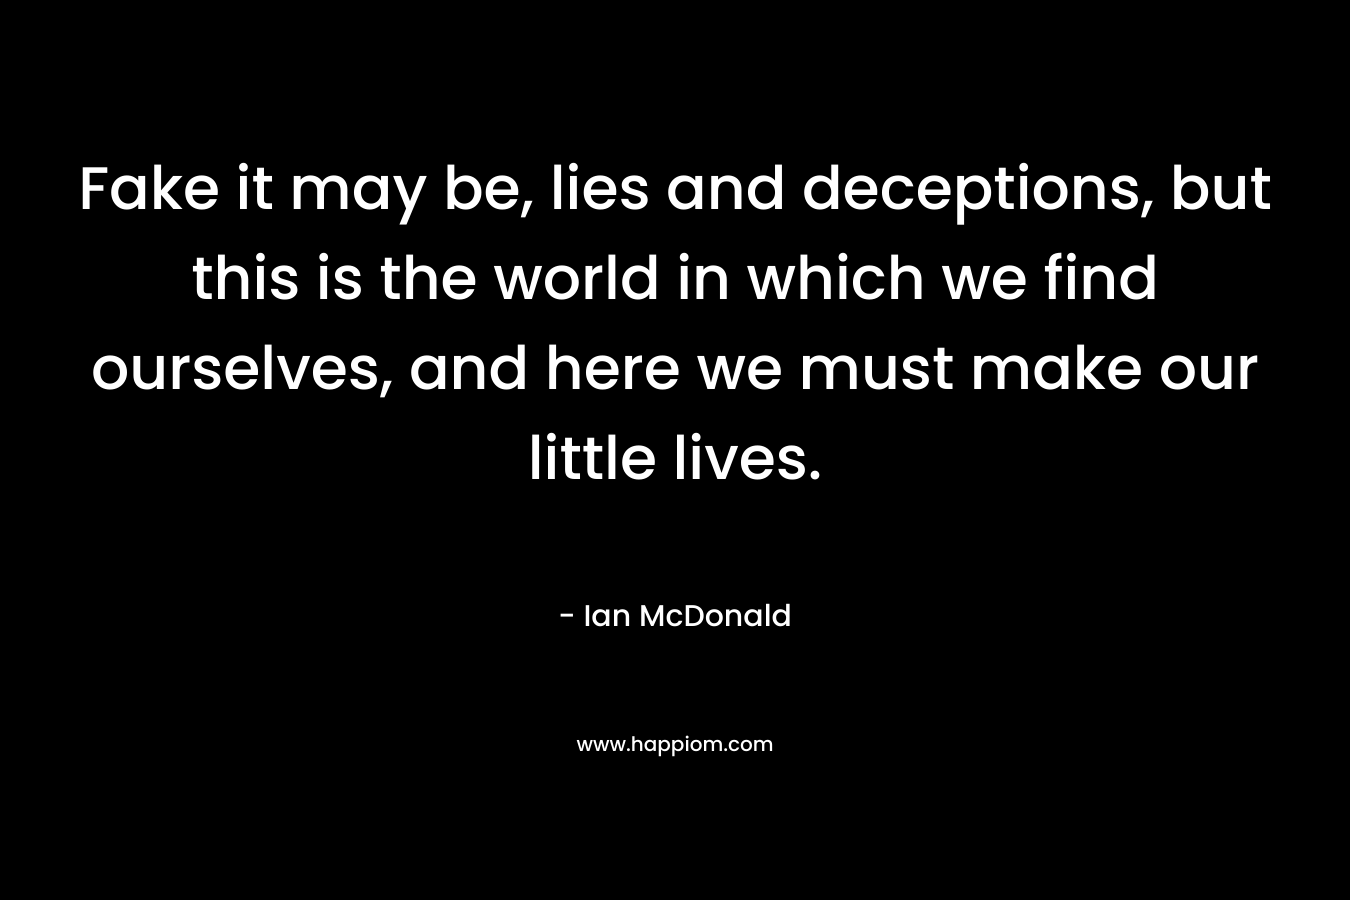 Fake it may be, lies and deceptions, but this is the world in which we find ourselves, and here we must make our little lives.